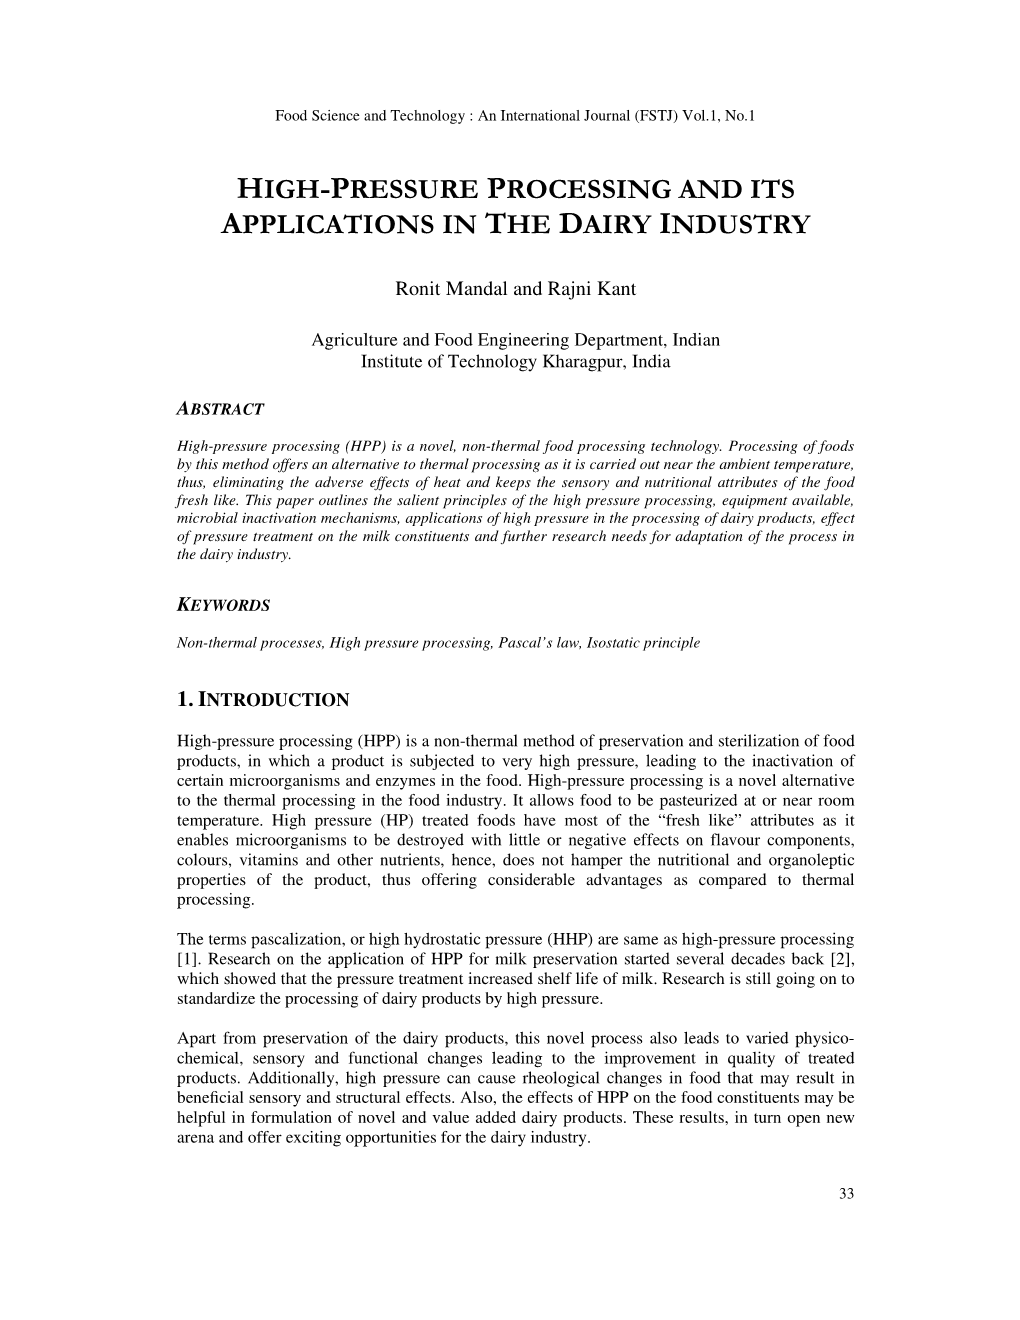 High-Pressure Processing and Its Applications in The